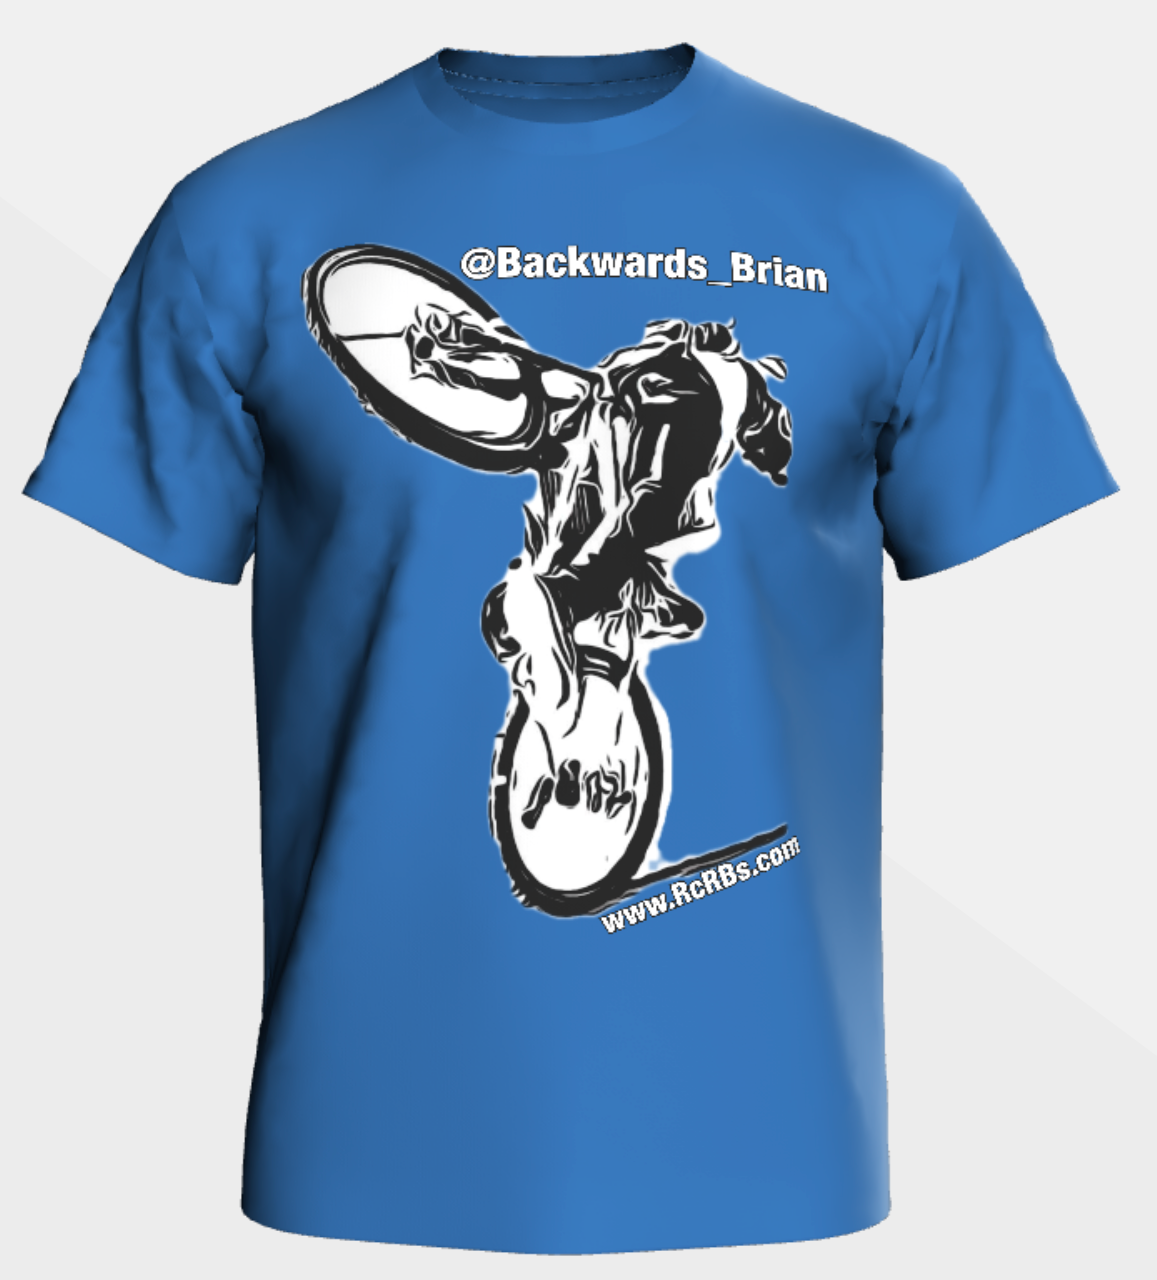 RichCity Rides Bike/Skate Cooperative -"Backwards Brian"-T-Shirt - Sustainable Clothing Collection